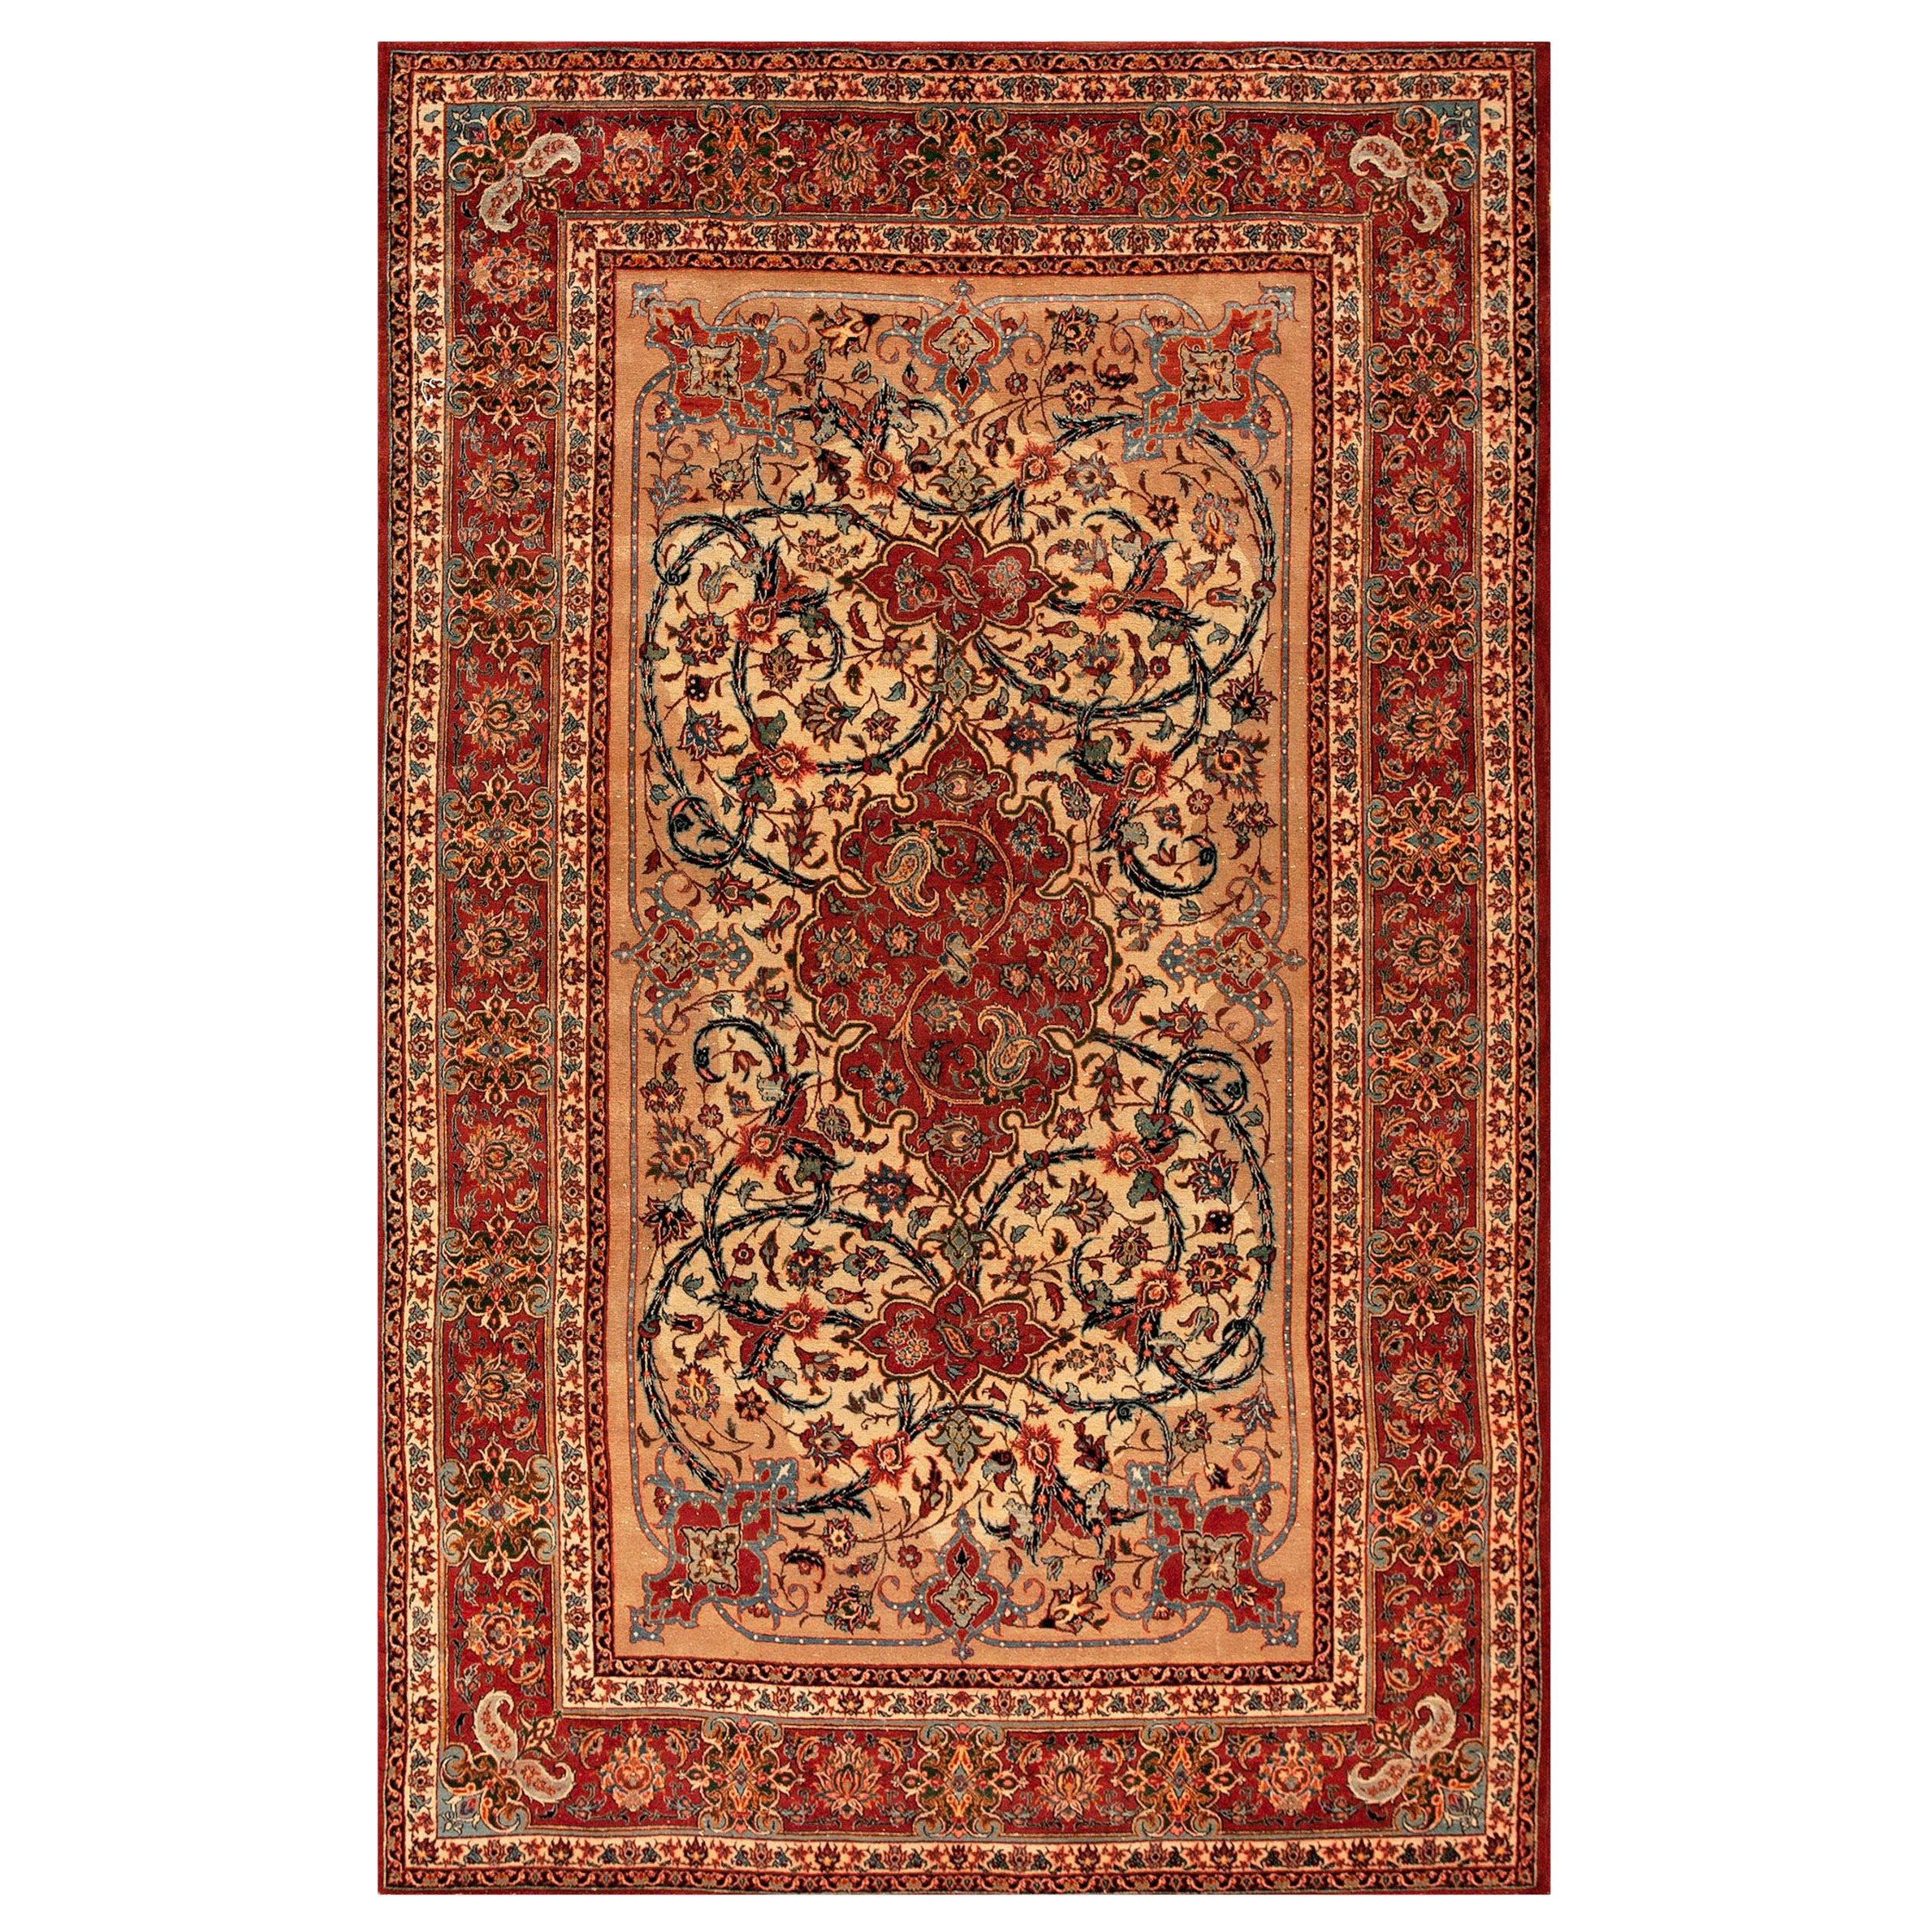 How can I tell if my Persian carpet is real?